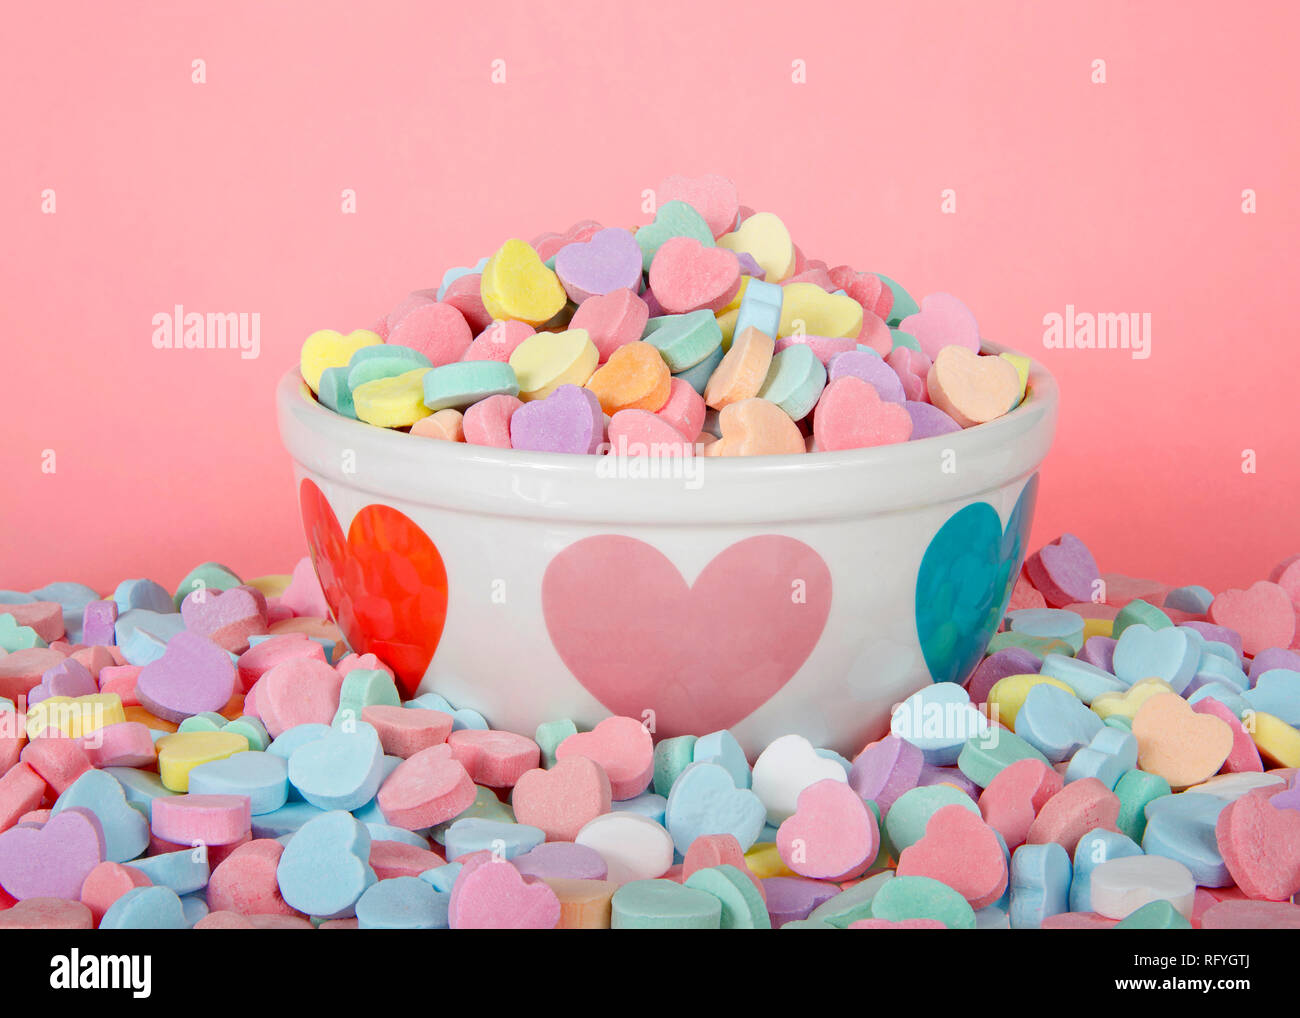 Candy Conversation Heart Stock Illustrations  447 Candy Conversation Heart  Stock Illustrations Vectors  Clipart  Dreamstime